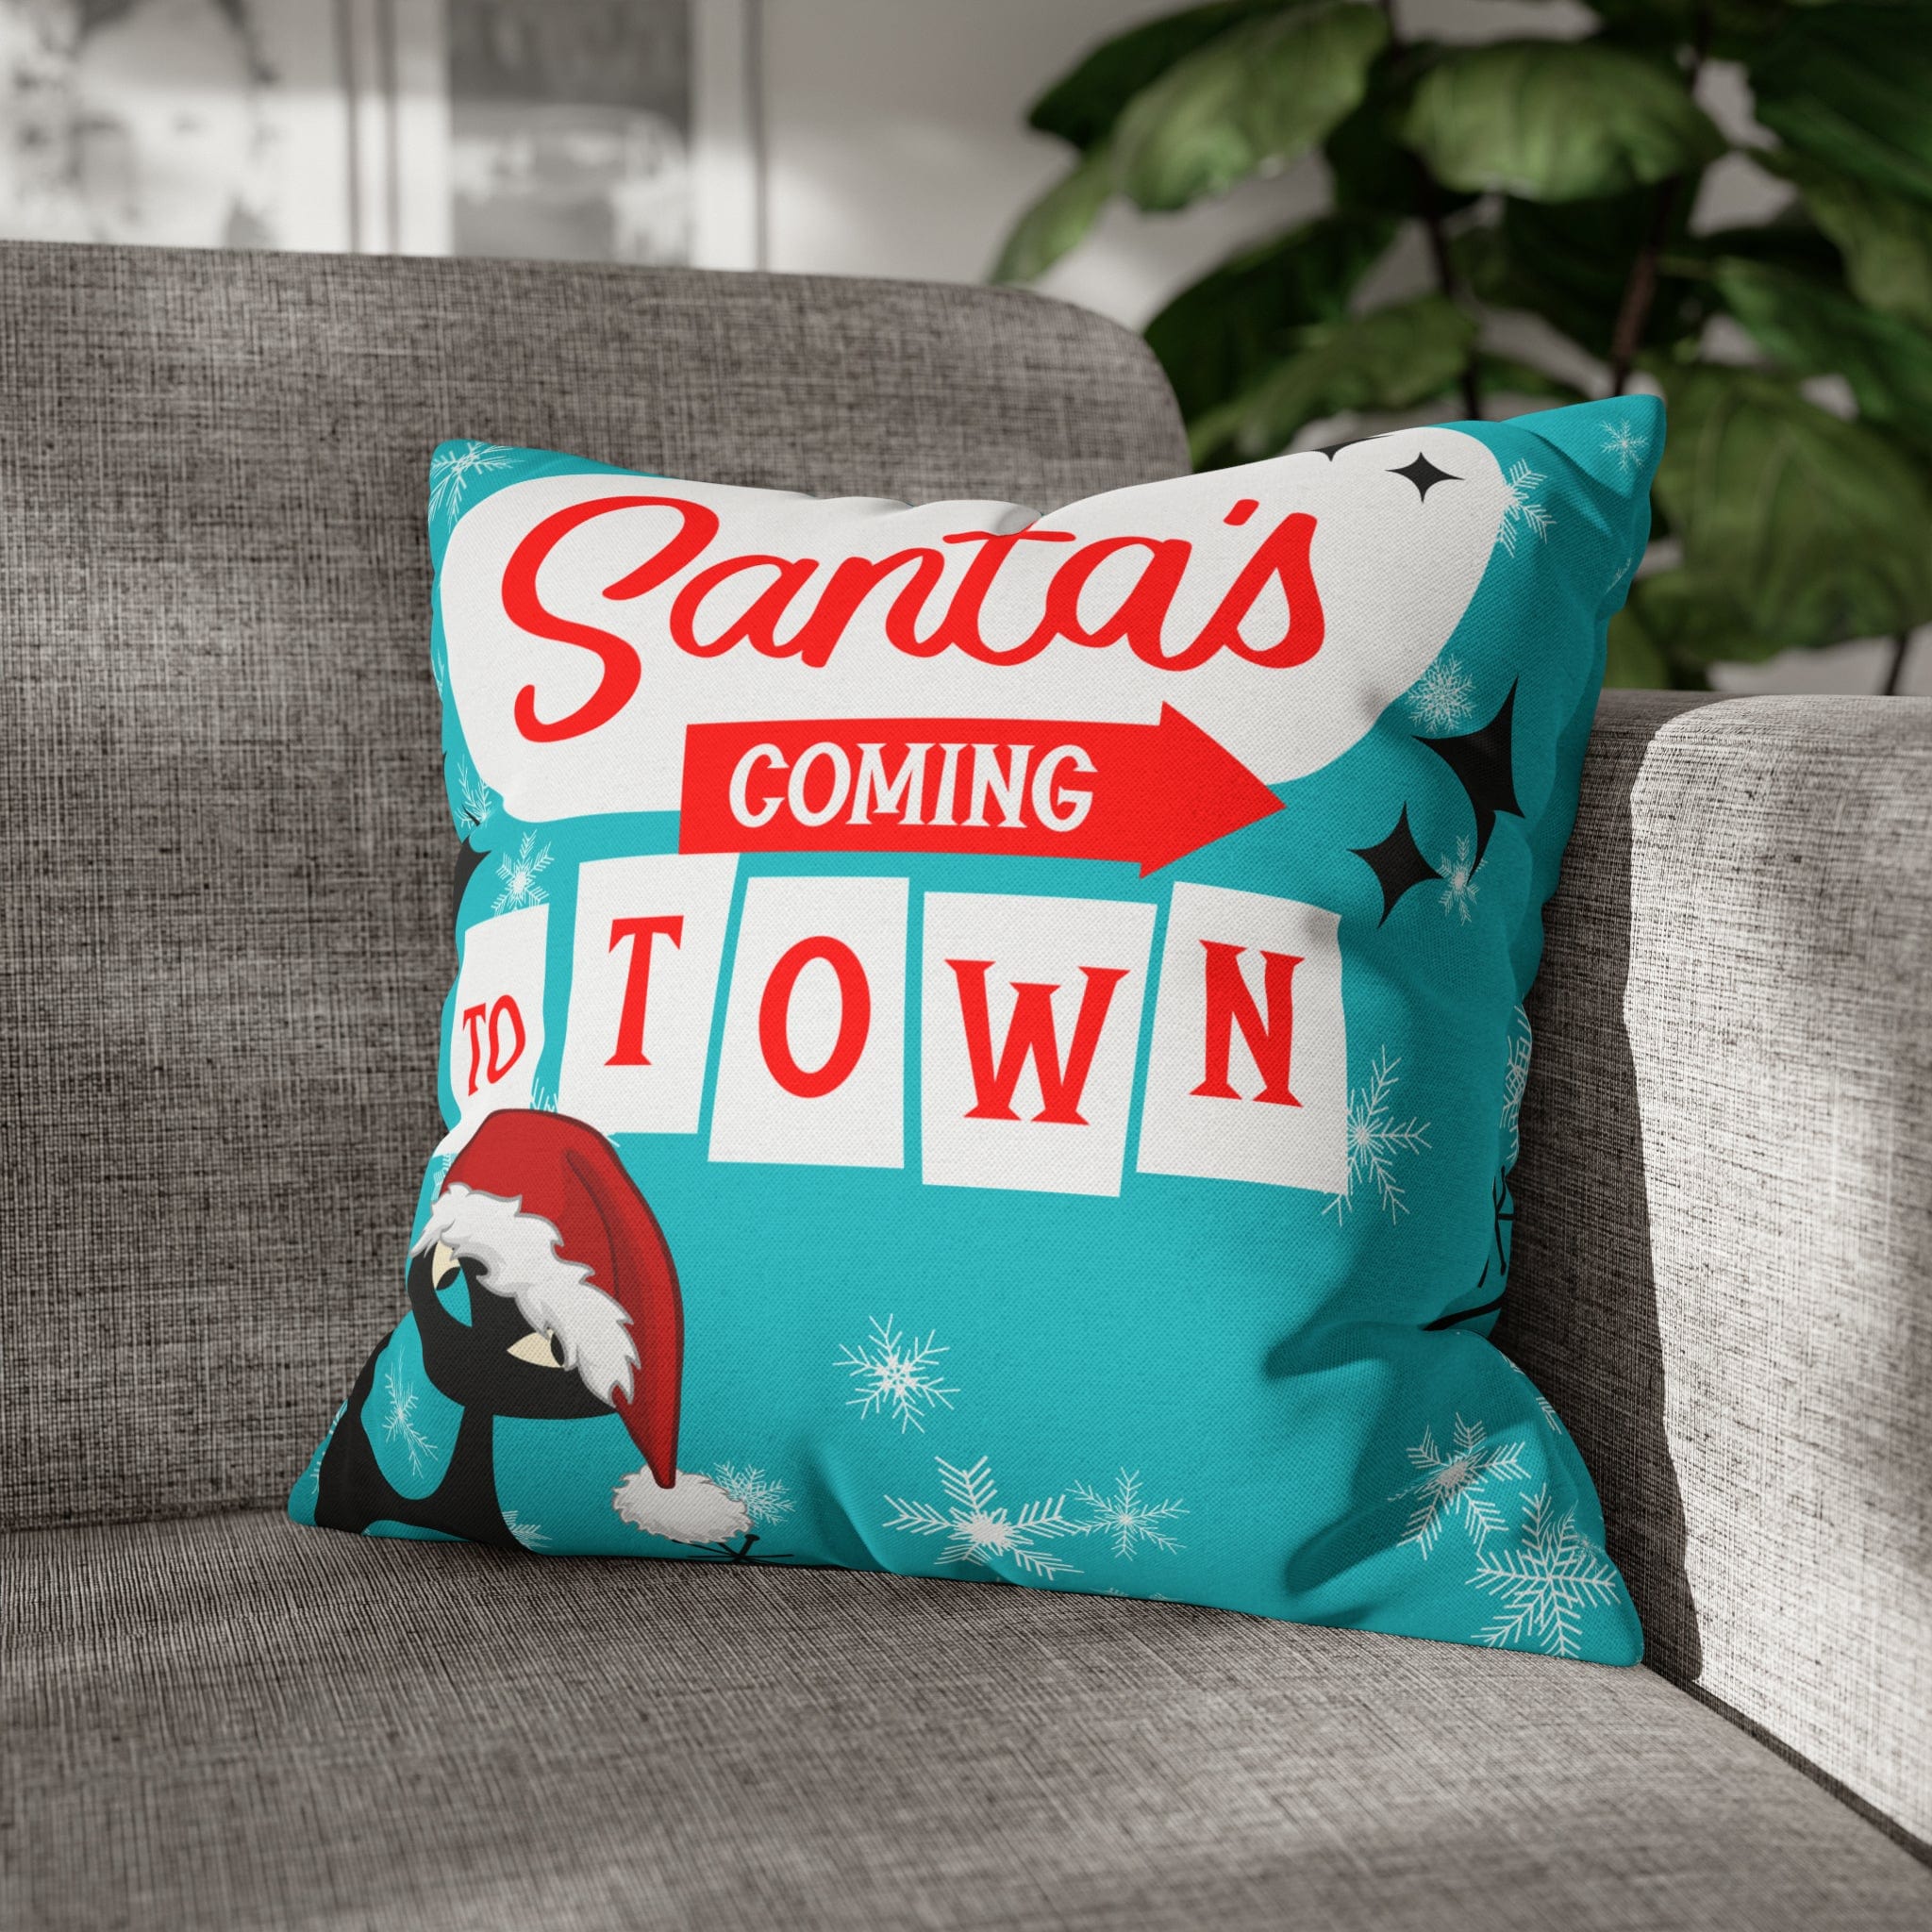 Mid Century Modern Chrismas Pillow Cover, Atomic Kitschy Cat, Snowflakes Pillow Cover, Aqua Blue Holiday MCM Pillow Case Cusion Covers Home Decor